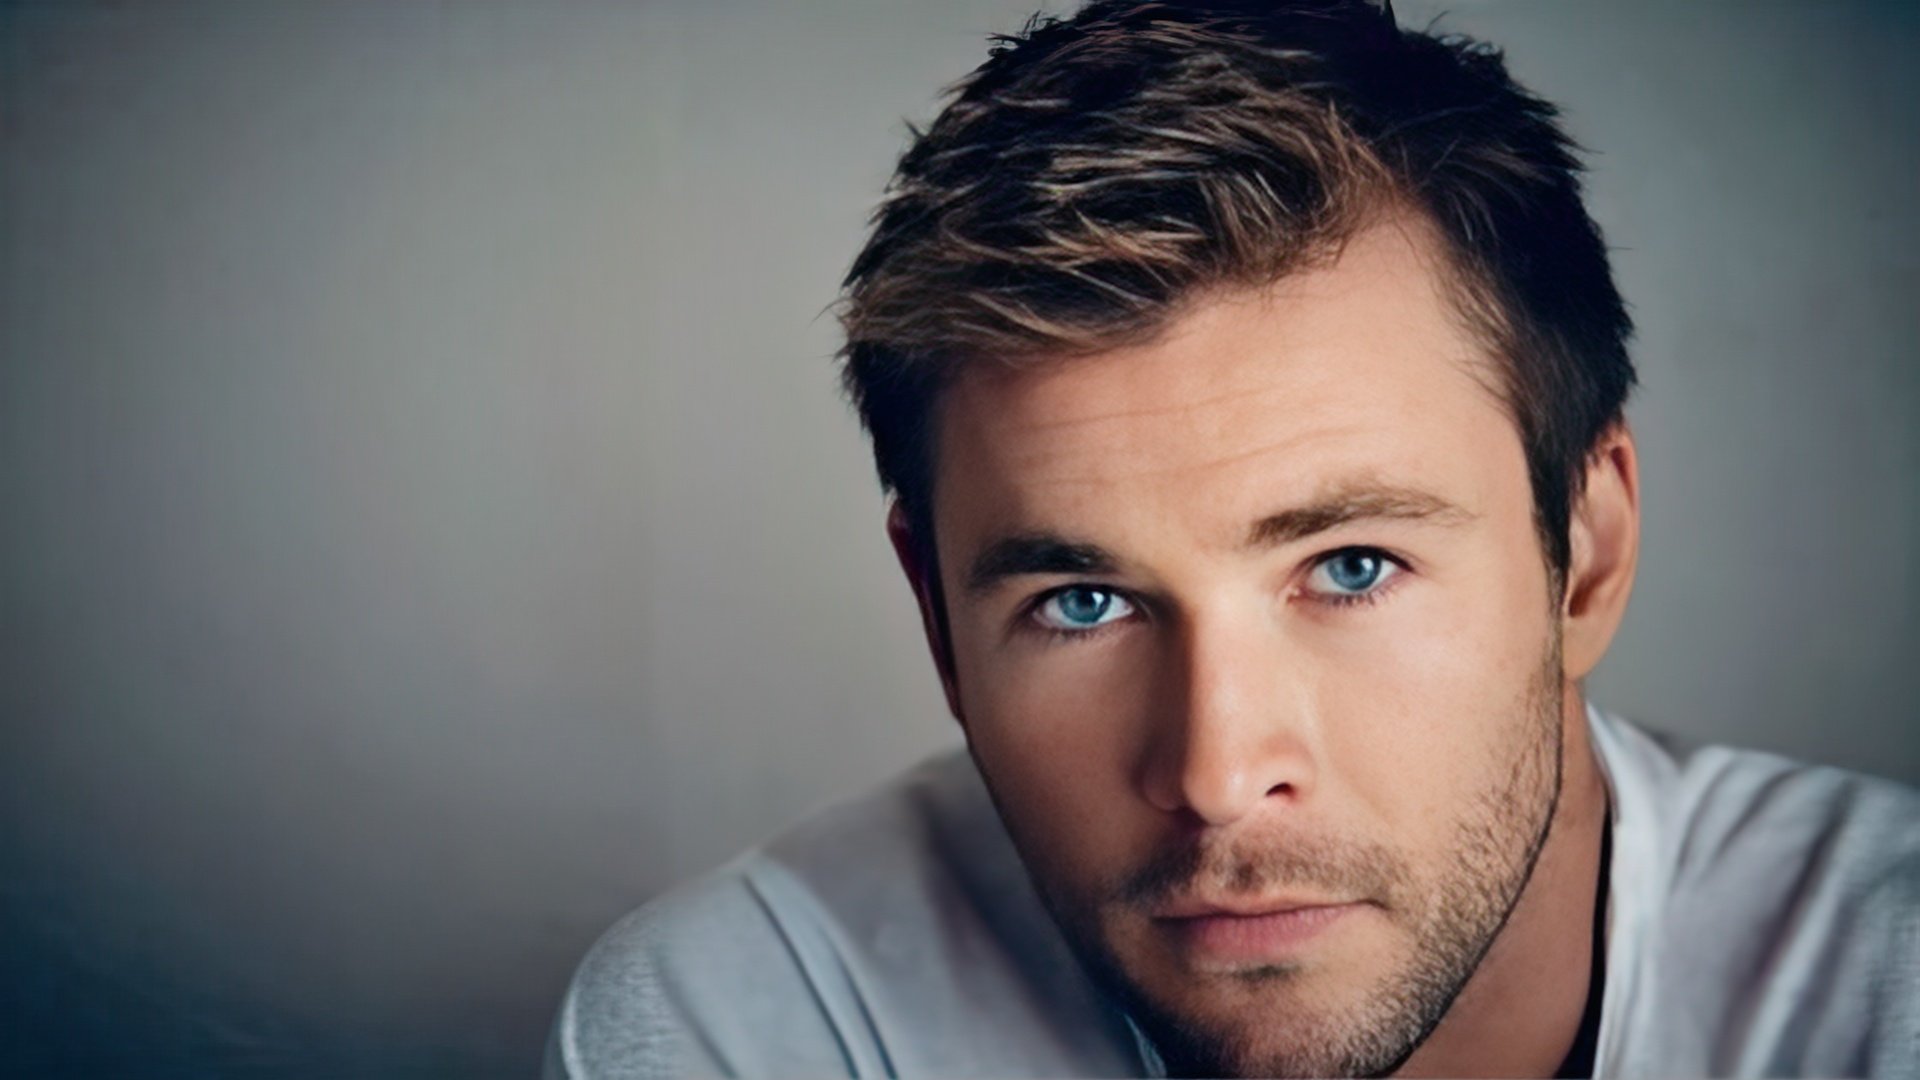 Chris Hemsworth is an outstanding actor not only due to Thor’s role